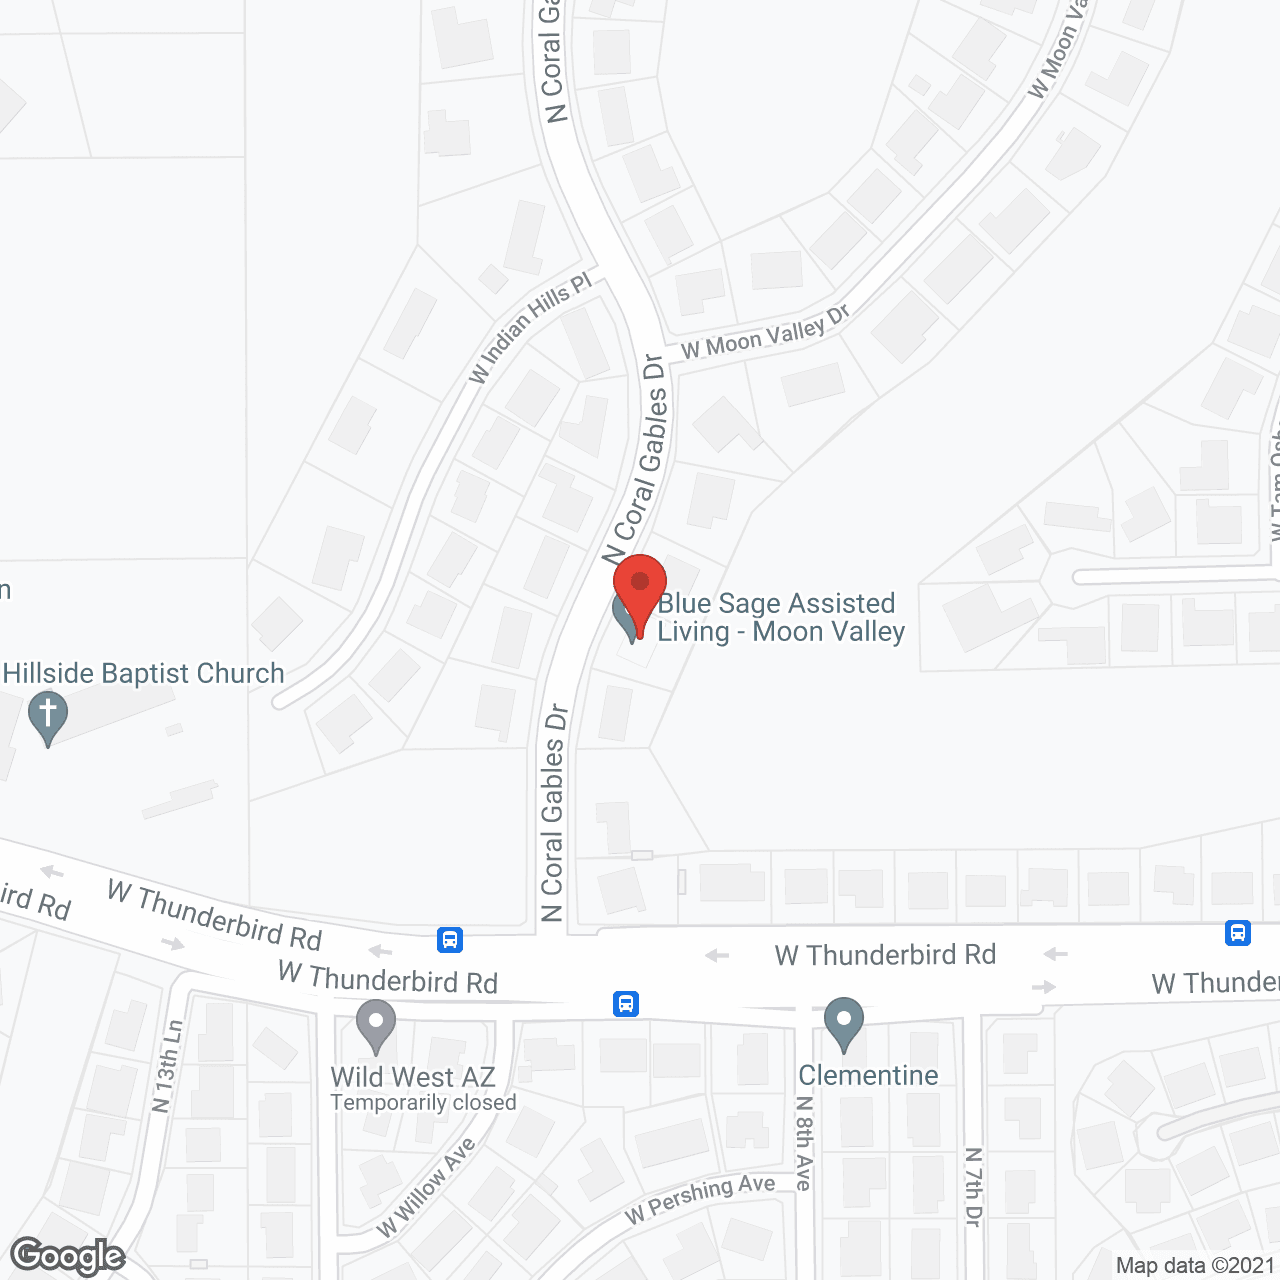 Blue Sage Assisted Living - Moon Valley in google map